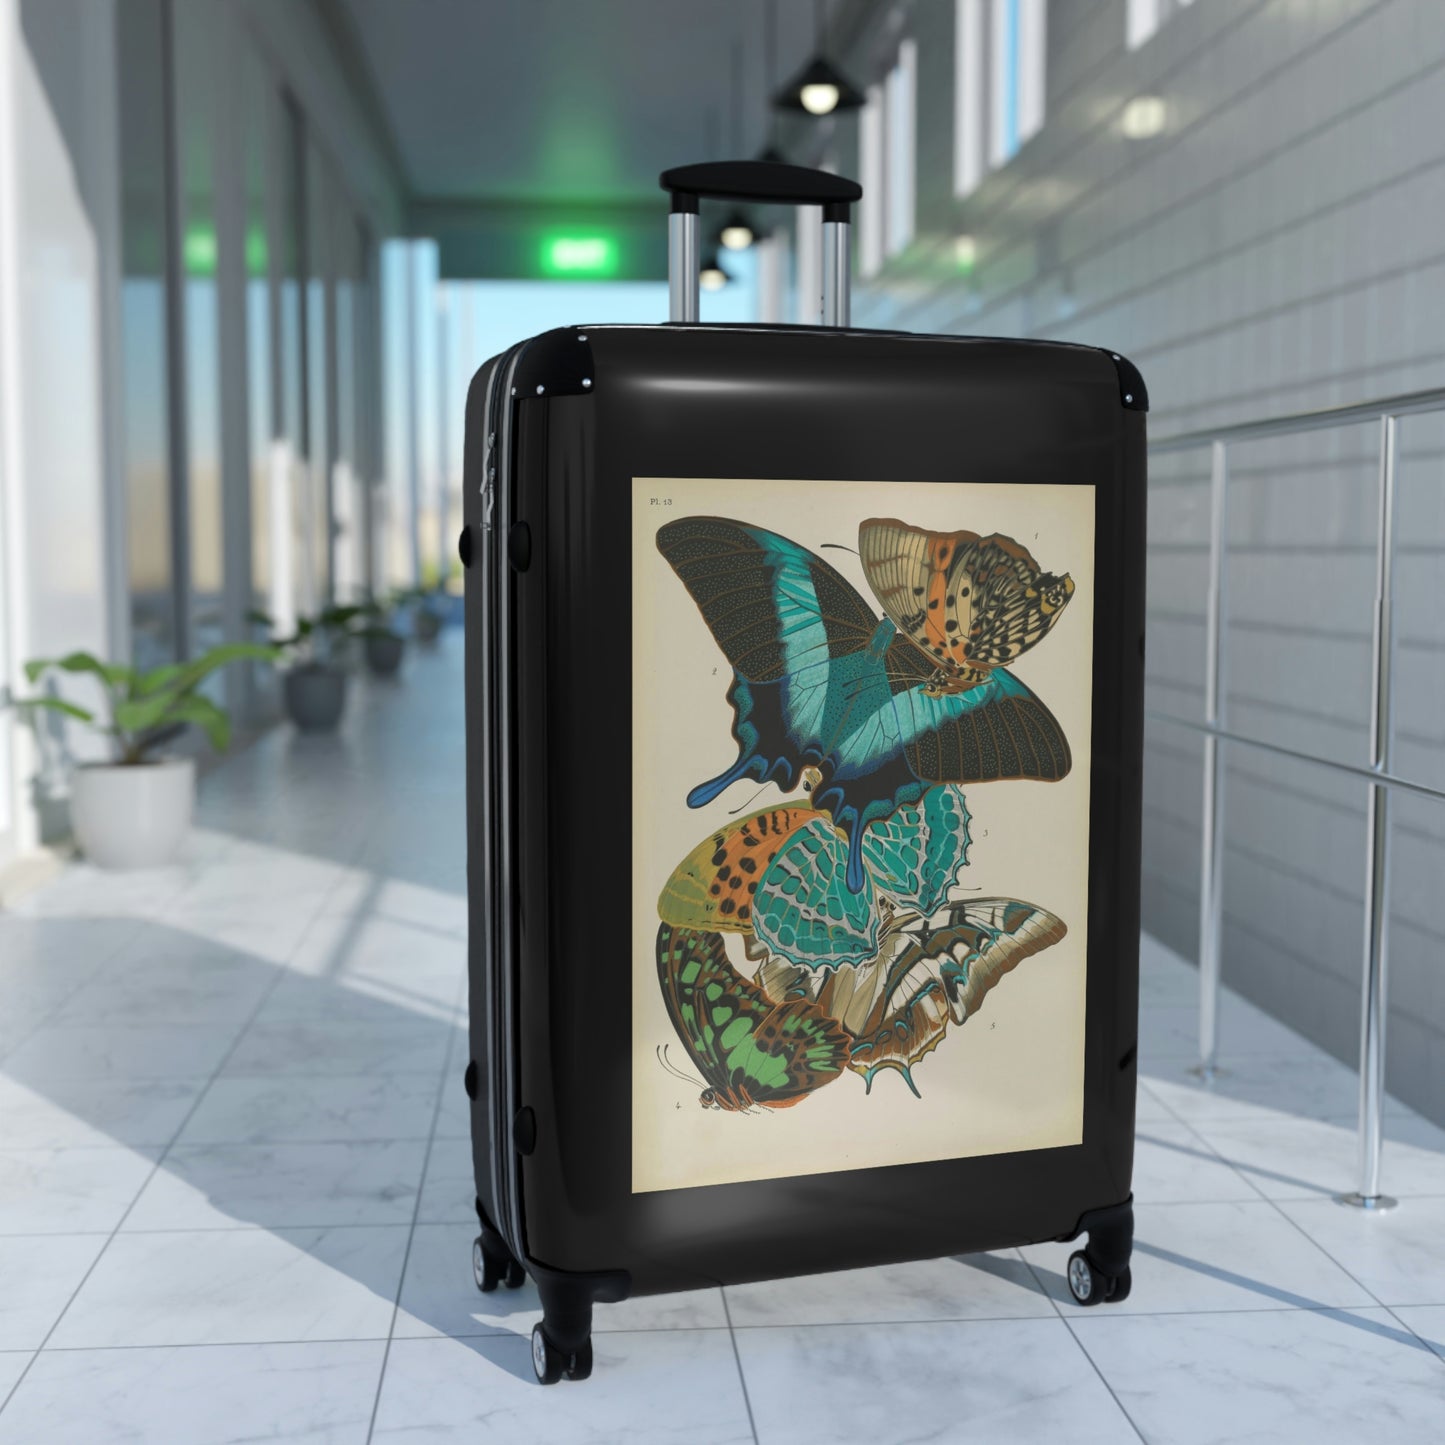 Getrott Butterflies Macrolepidopteran Rhopalocera Lepidoptera Turquoise Colors Cabin Suitcase Rolling Luggage Inner Pockets Extended Storage Adjustable Telescopic Handle Inner Pockets Double wheeled Polycarbonate Hard-shell Built-in Lock